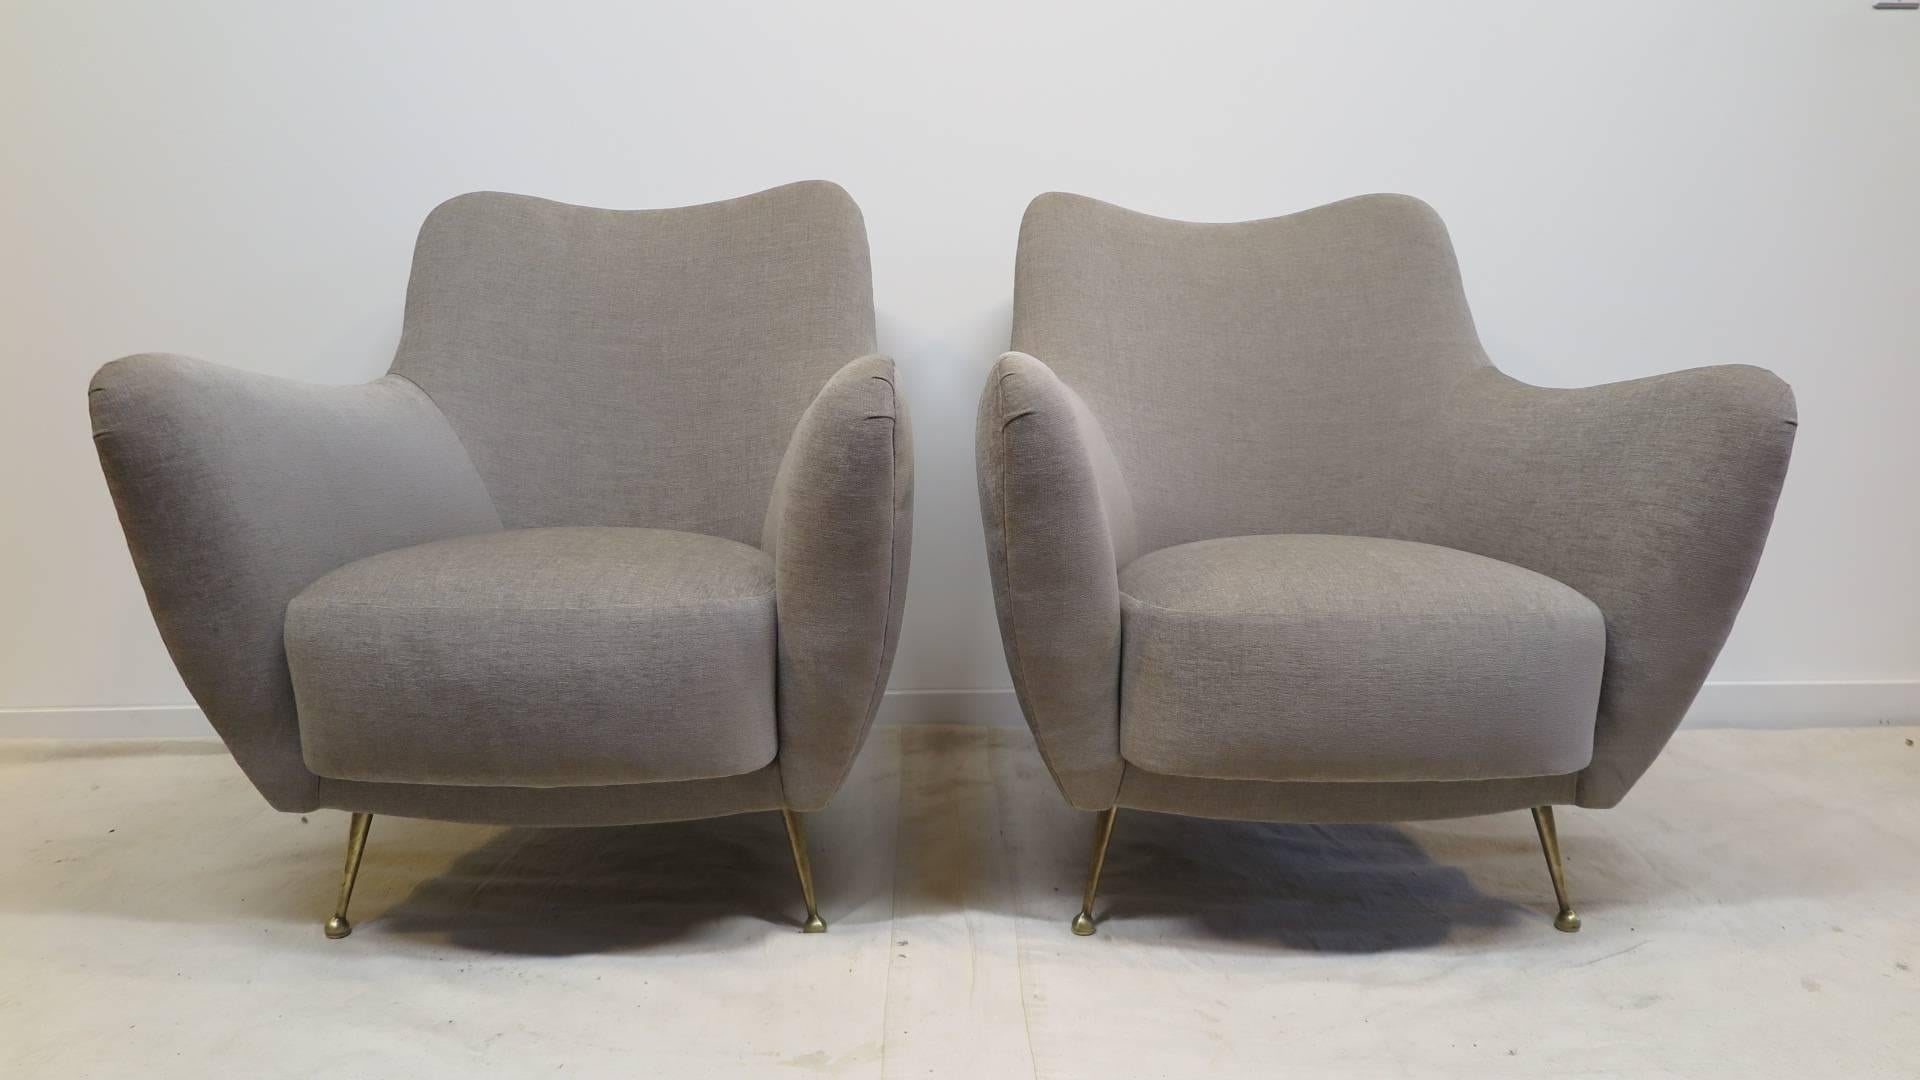 A pair of 1950 Italian sculpted lounge chairs, attributed to Giulia Veronesi, Perla chairs for ISA Bergamo, with solid brass legs supporting a contoured shaped seat. Very comfortable in excellent restored condition. 